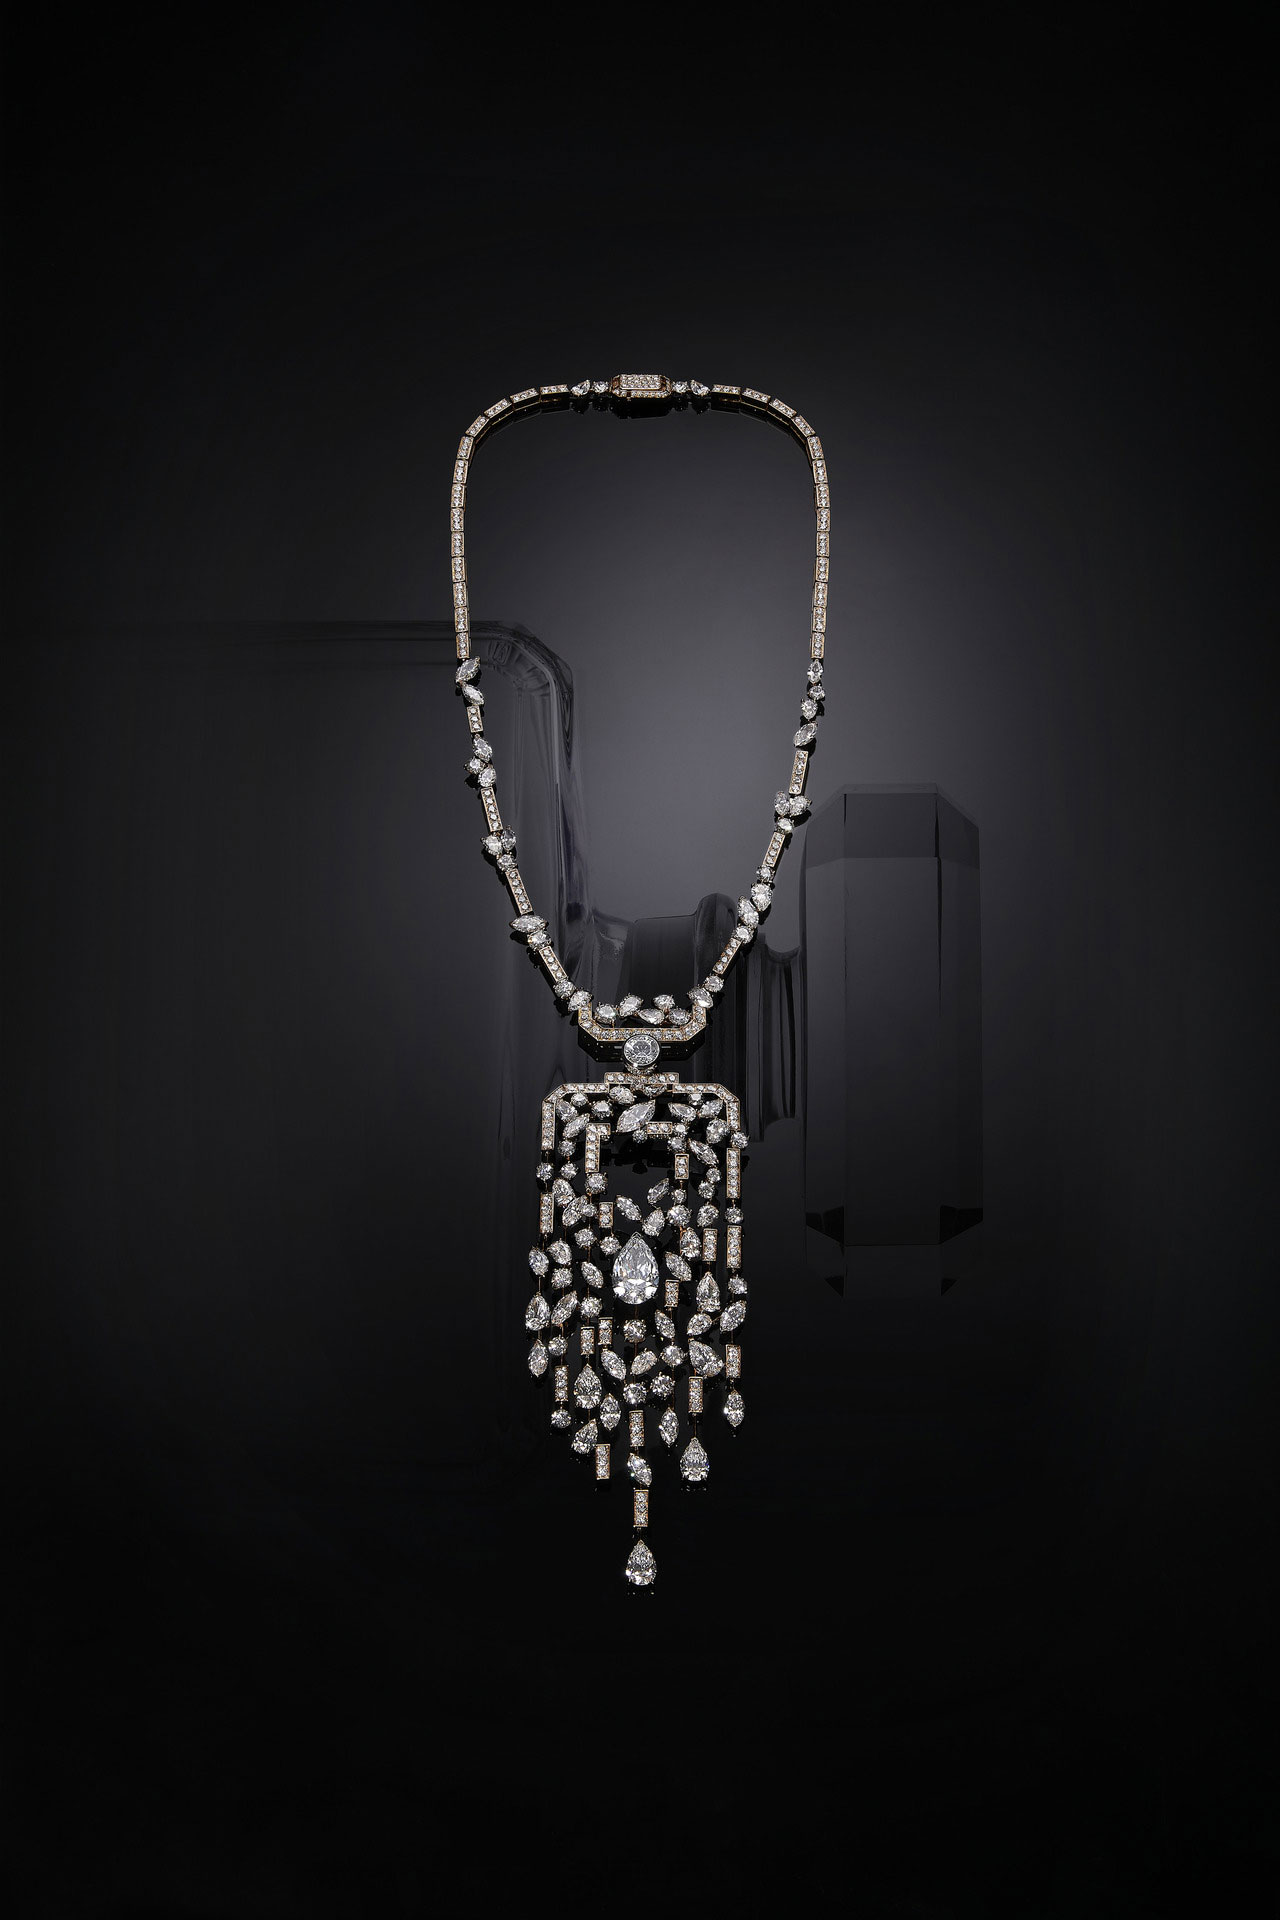 Collection N°5, Chanel High Jewelry. Collana in parure